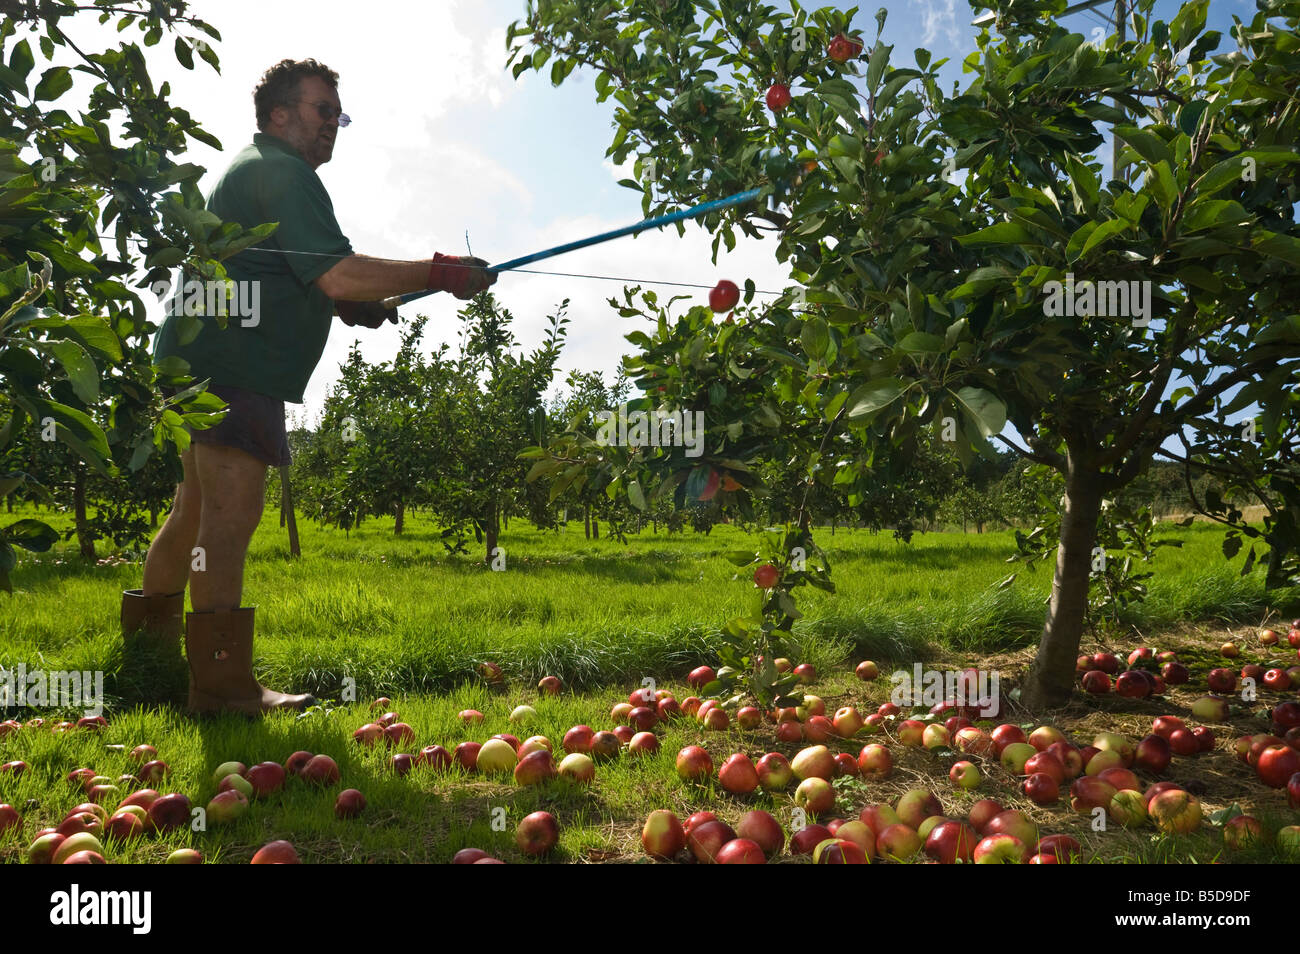 Harvesting remaining Katy cider apples after shaking the tree Thatchers Cider Orchard Sandford Somerset England Stock Photo